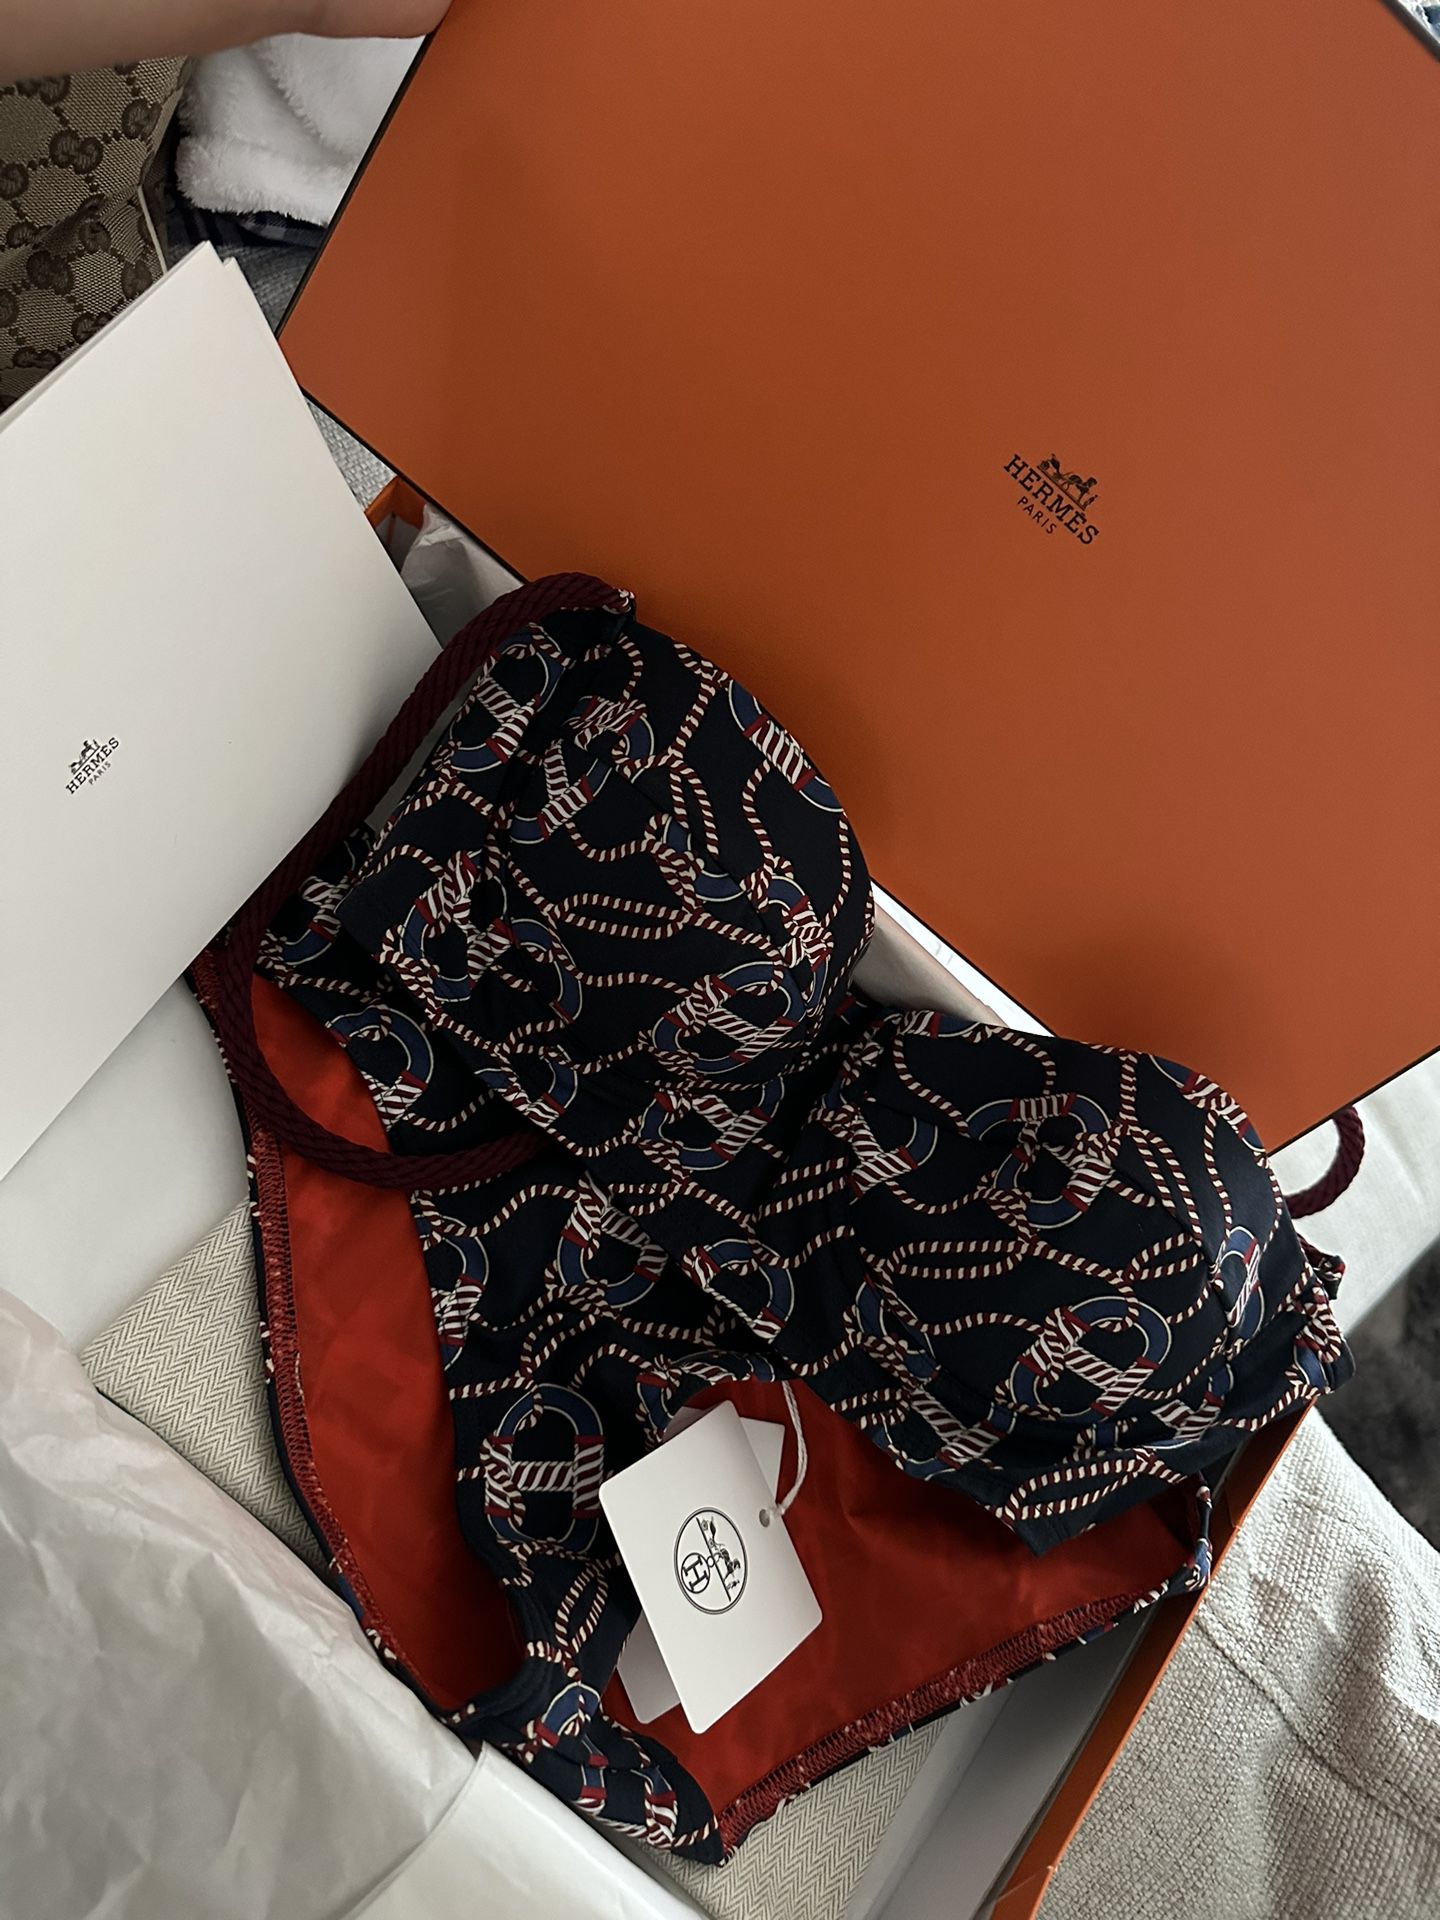  Used Authentic Gucci Bag And New Hermes Bathing Suit 